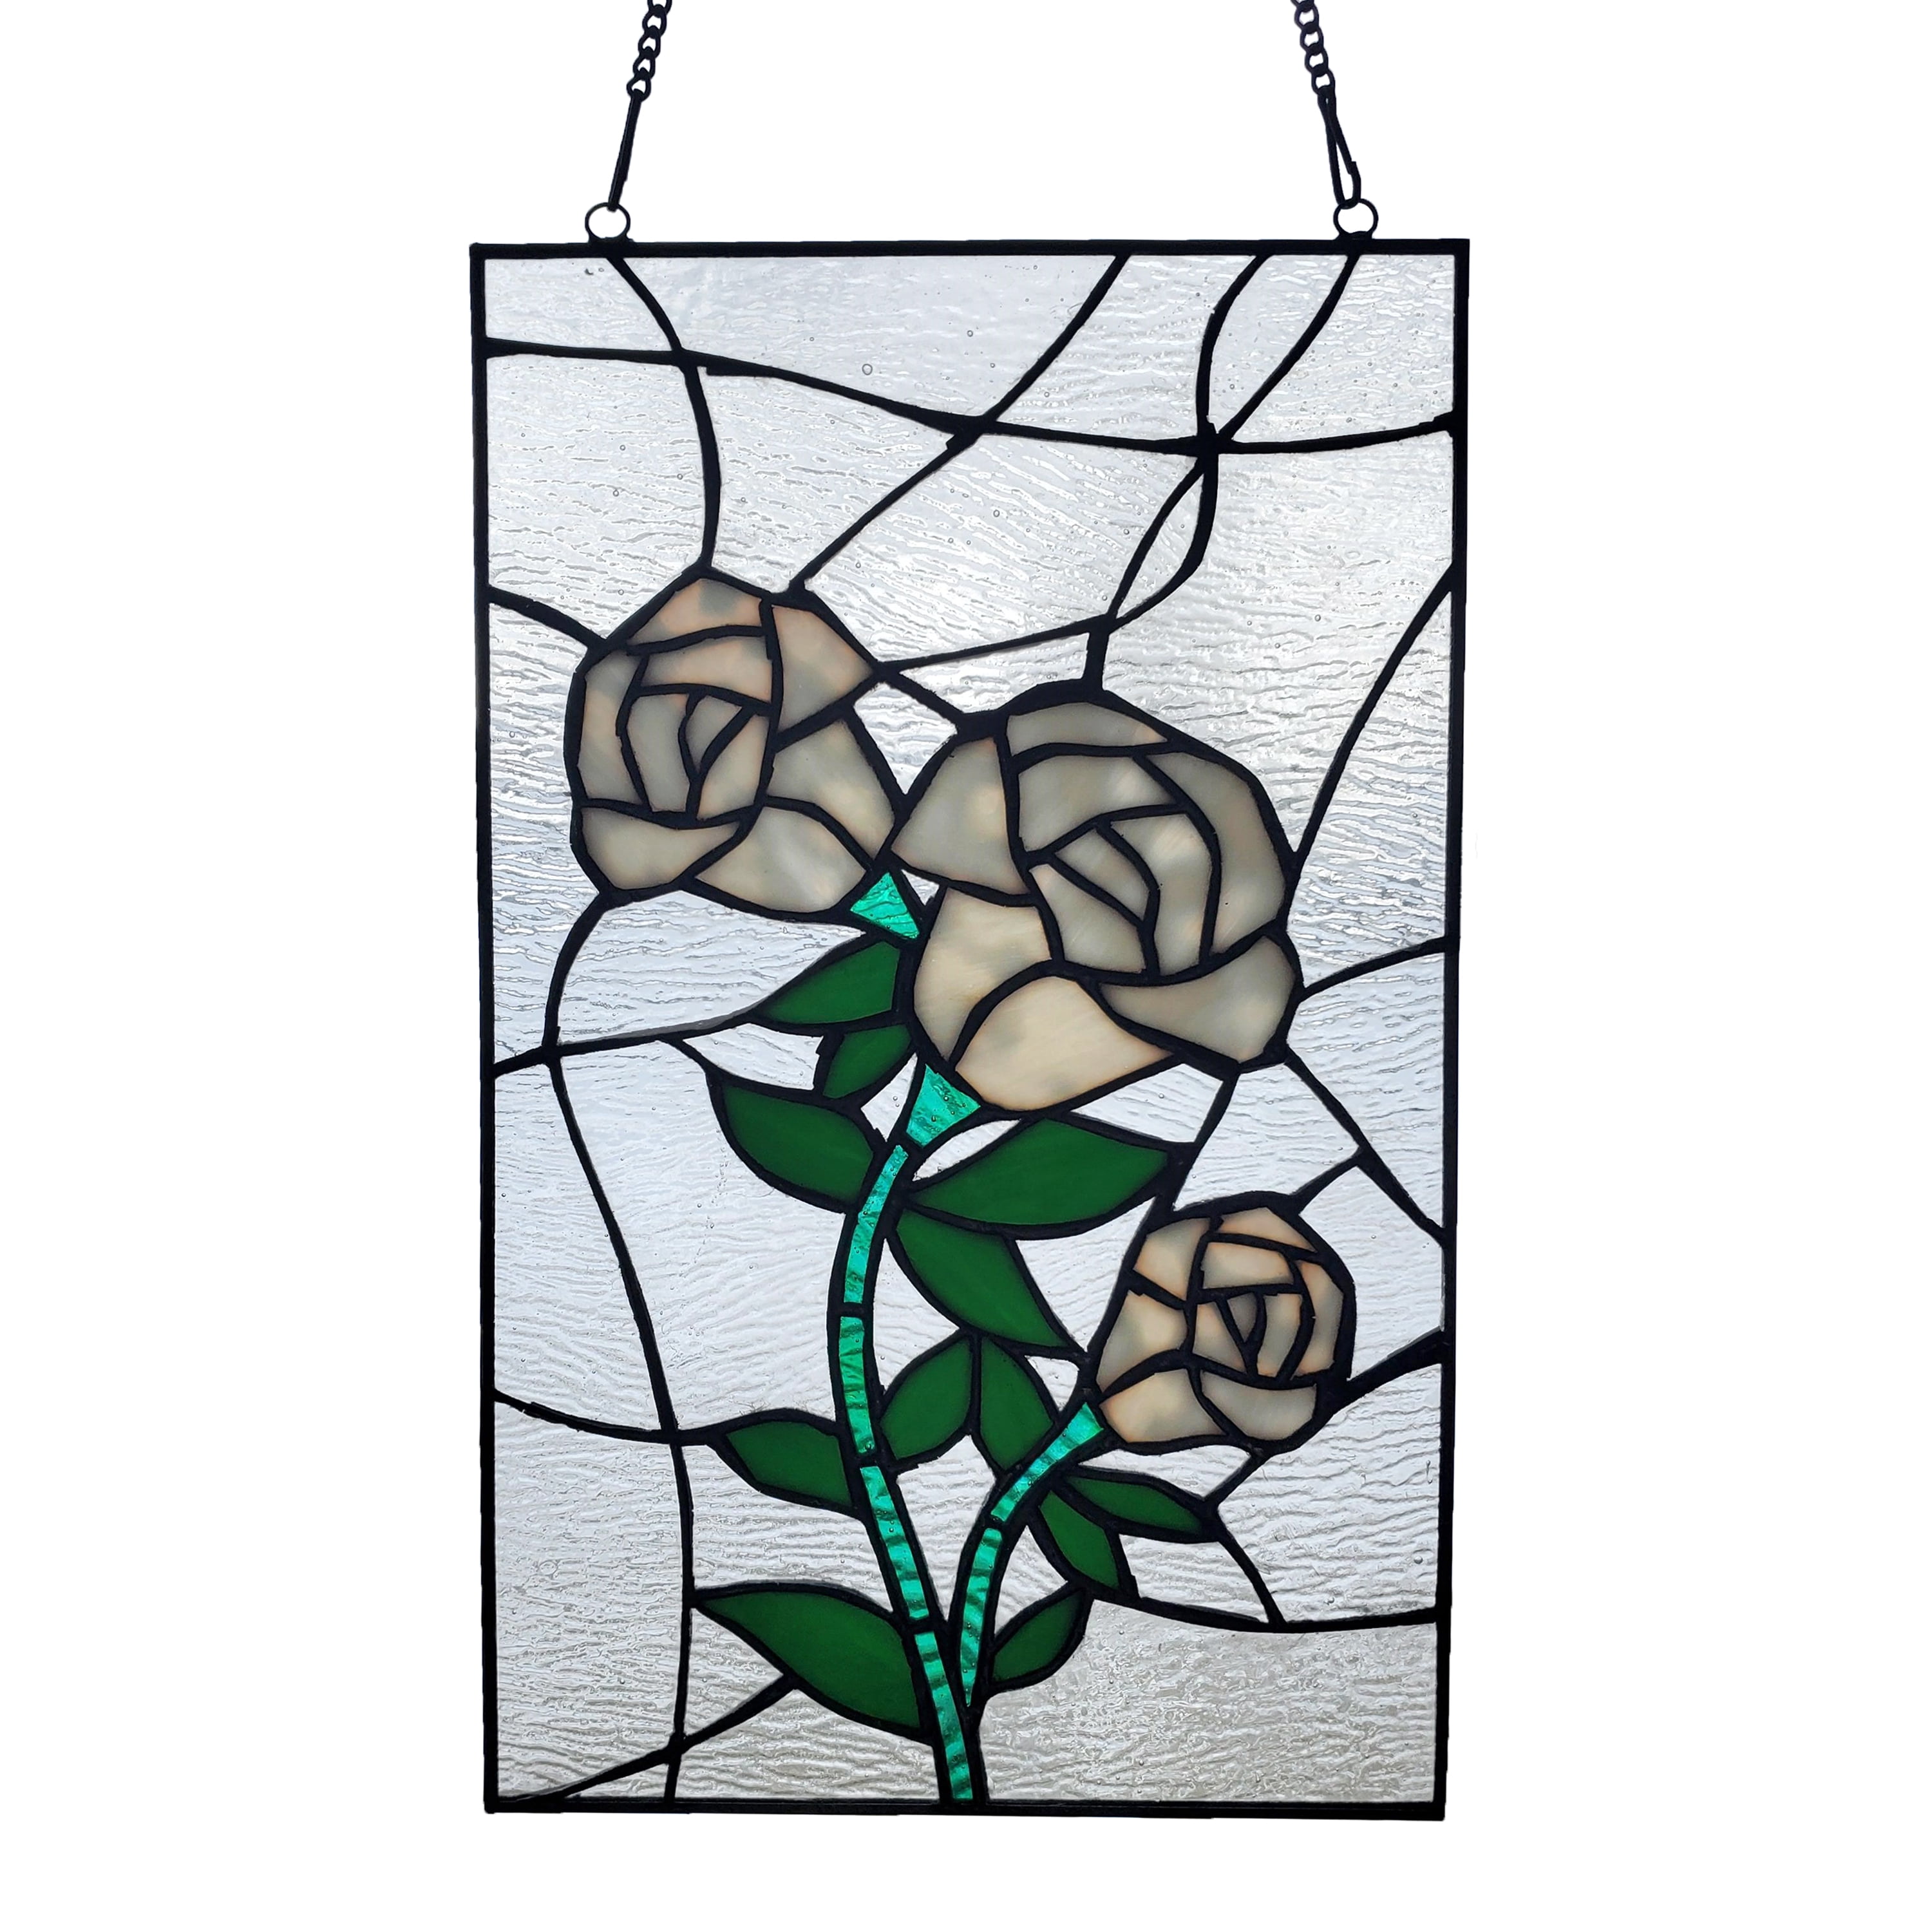 River of Goods Victorian Rose Stained Glass Window Panel, Red